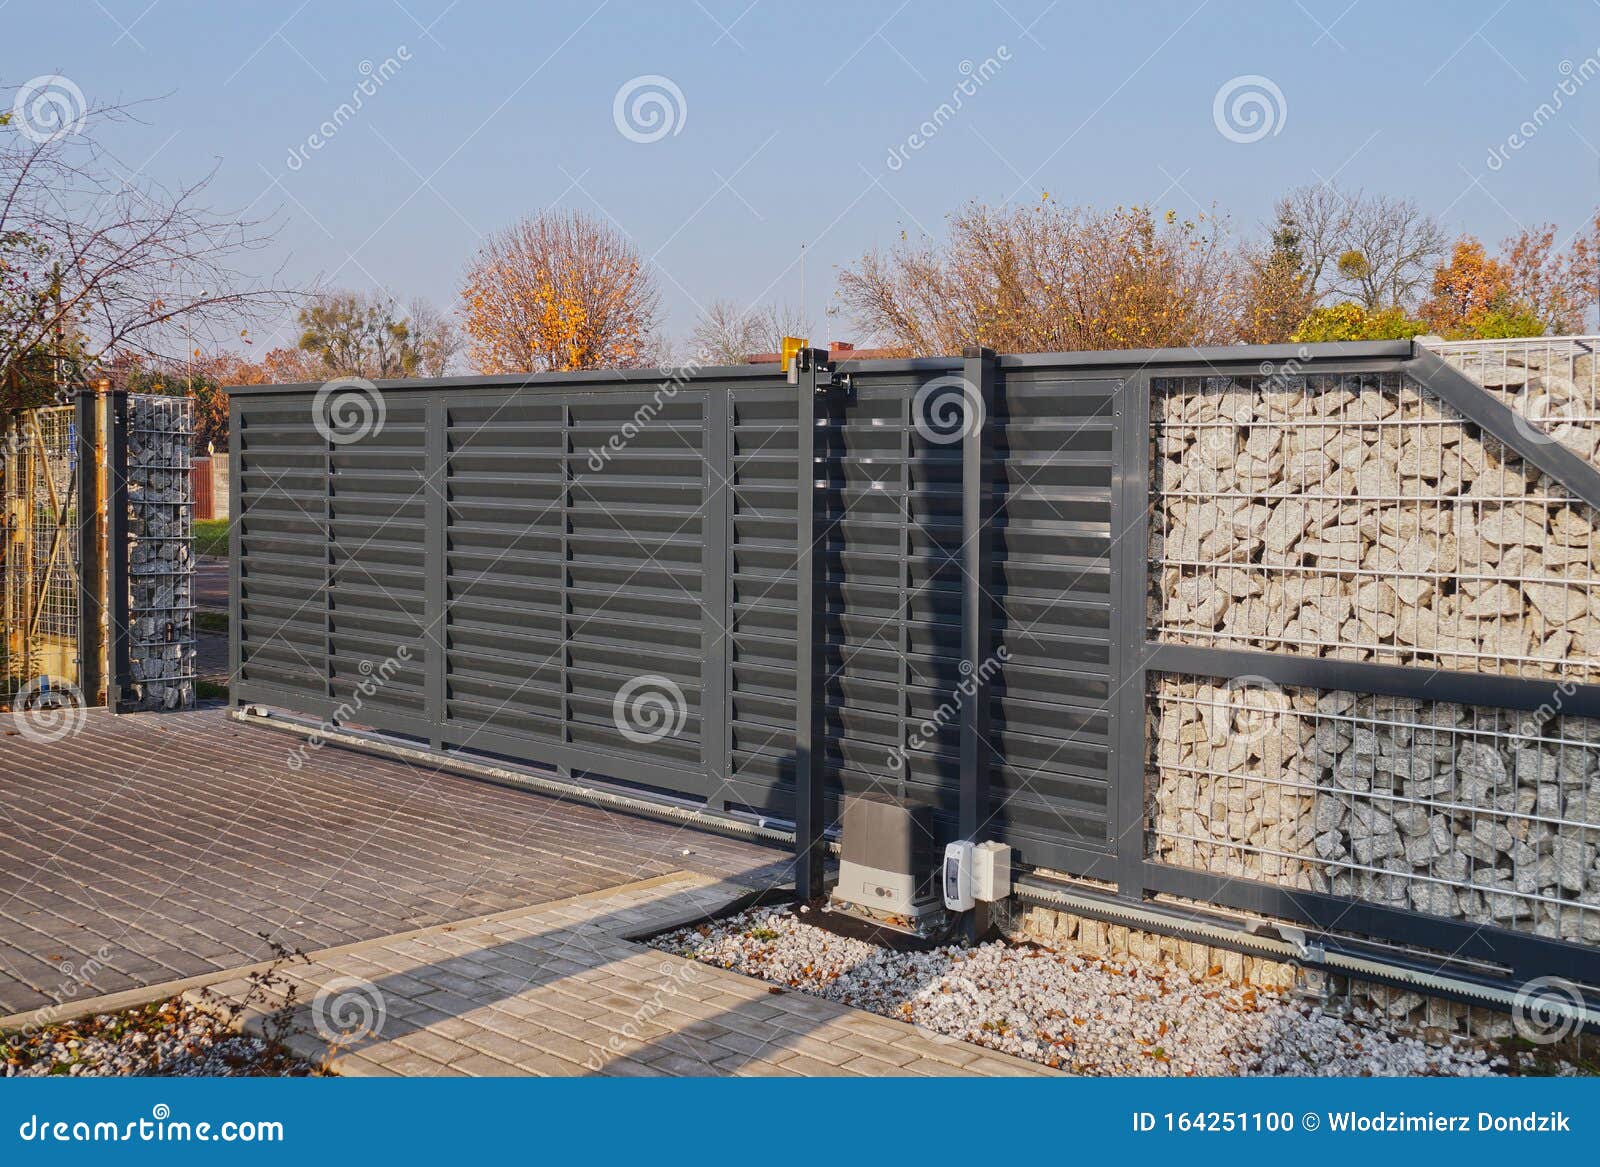 gabion. automatic entrance gate used in combination with a wall made of gabion